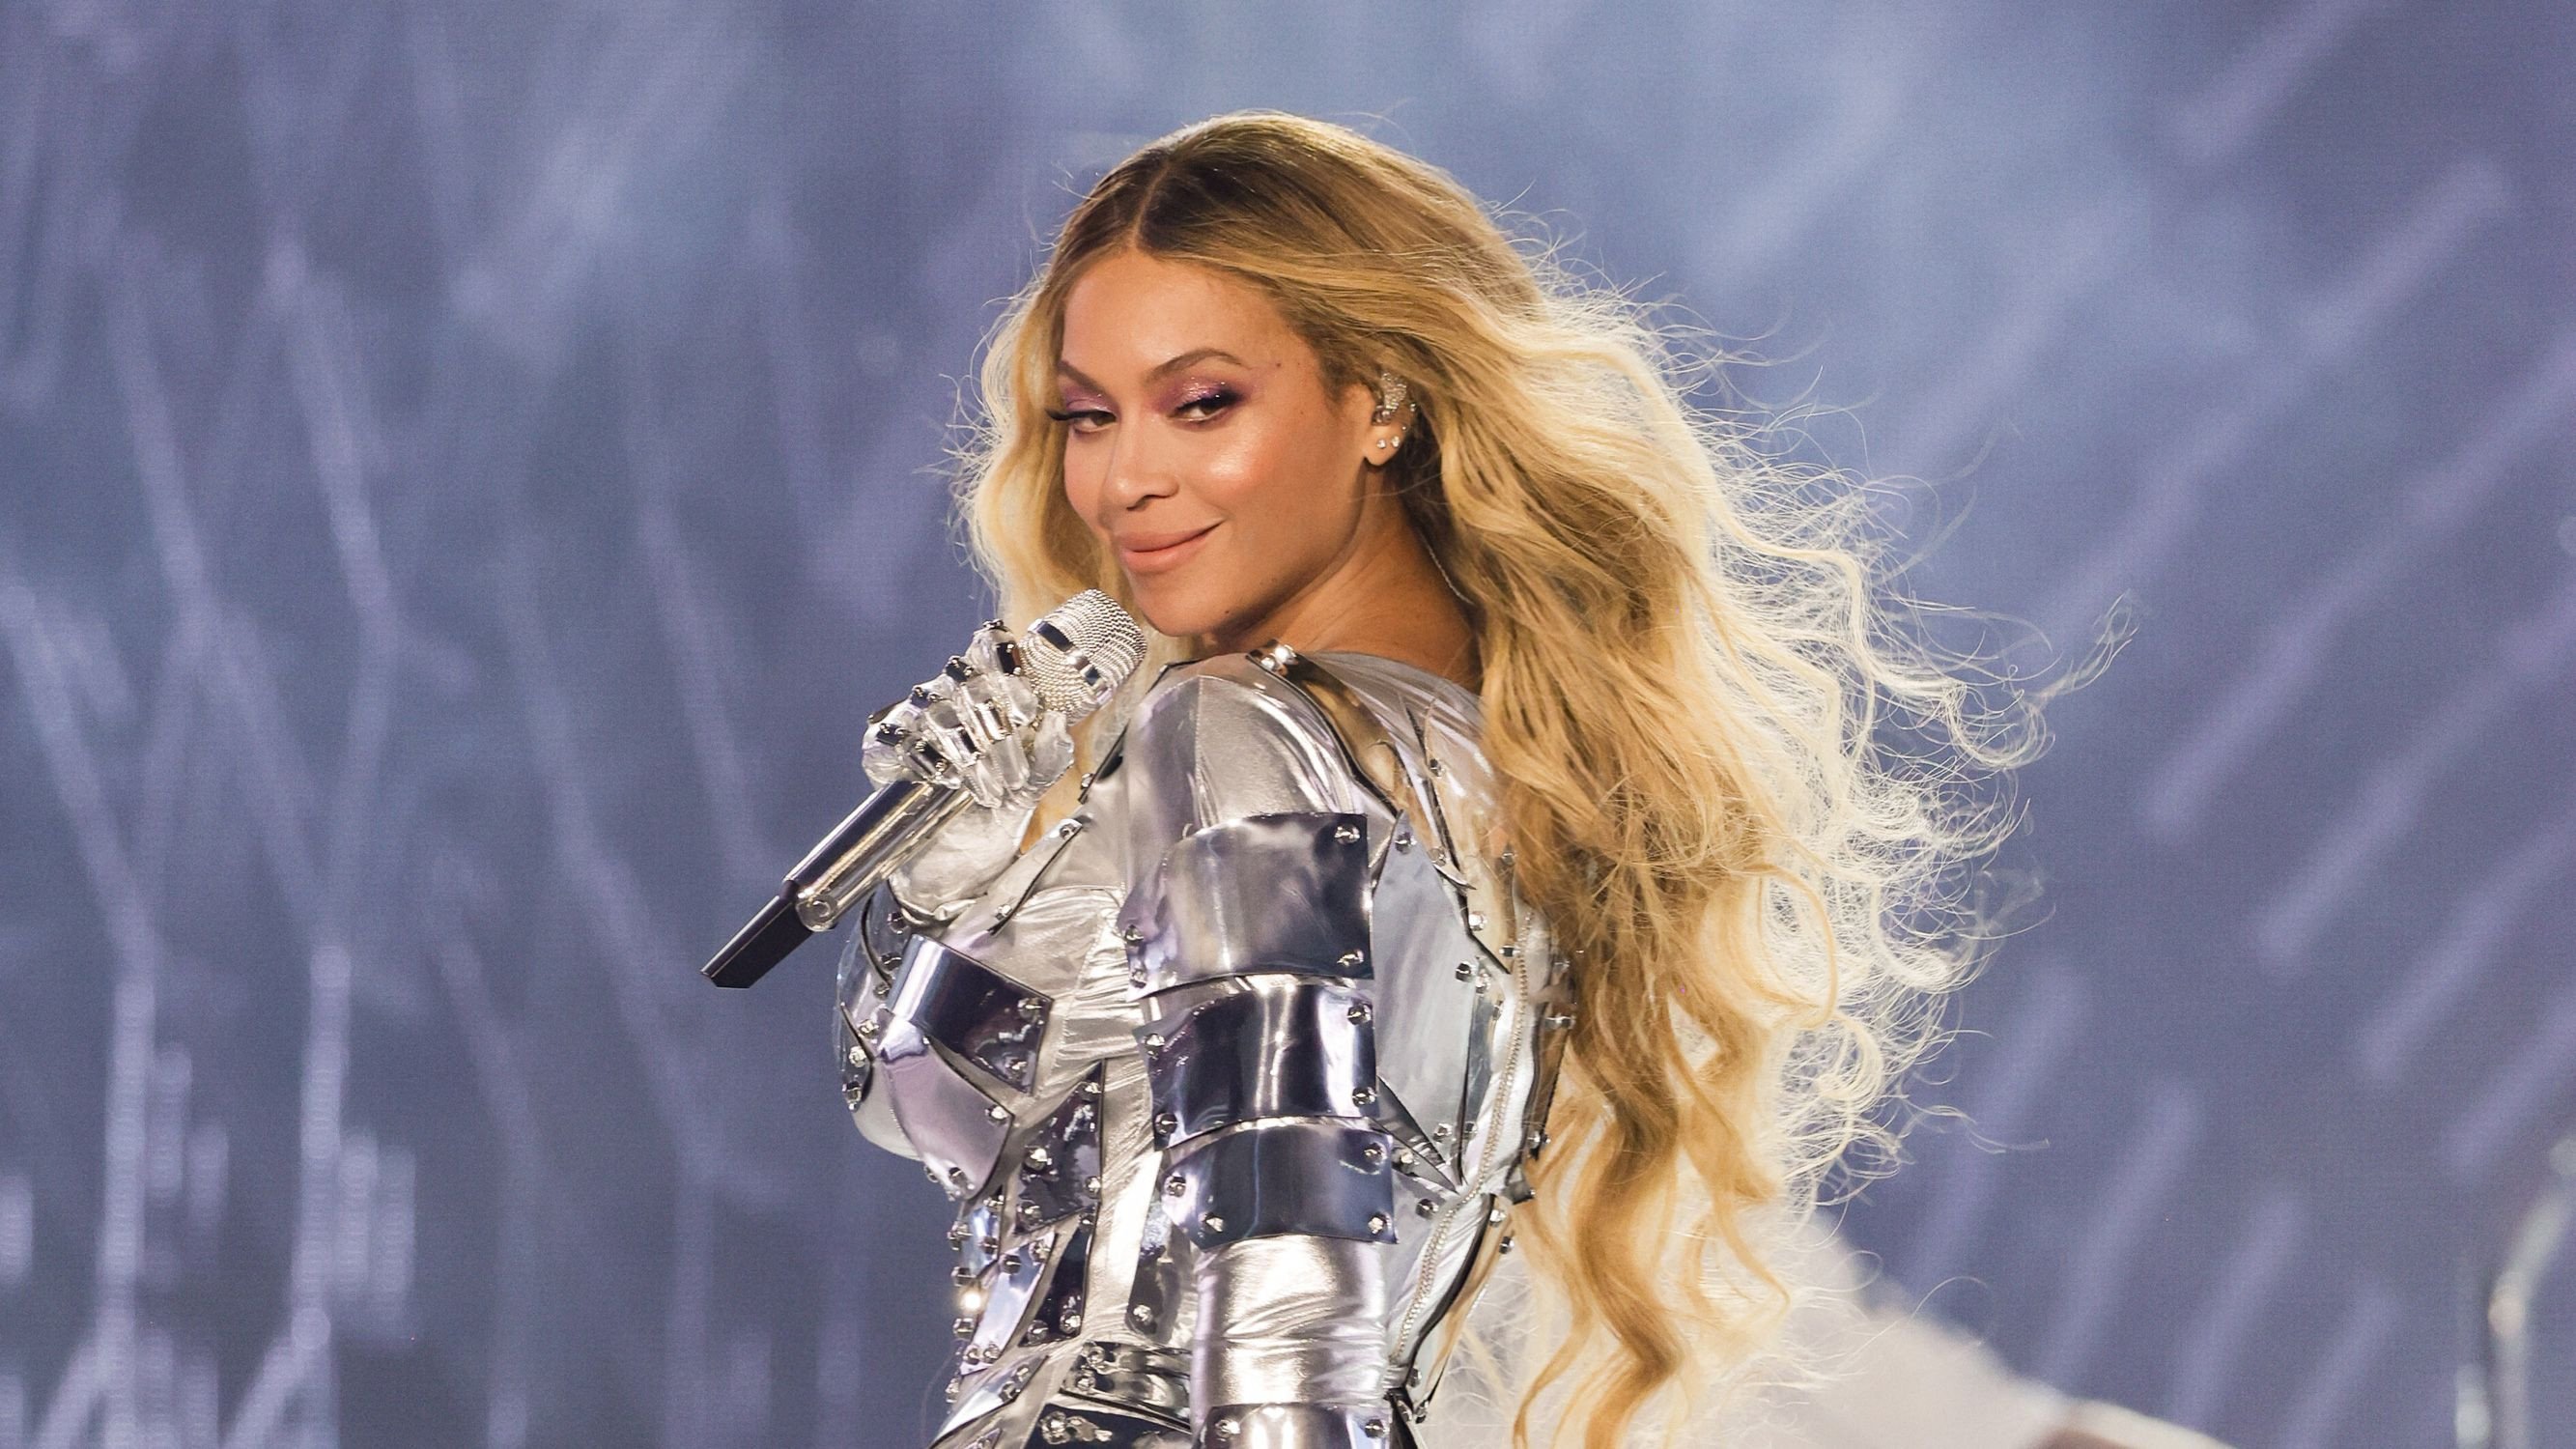 Beyonce storms to first UK no.1 in 14 years with 'Texas Hold 'Em'